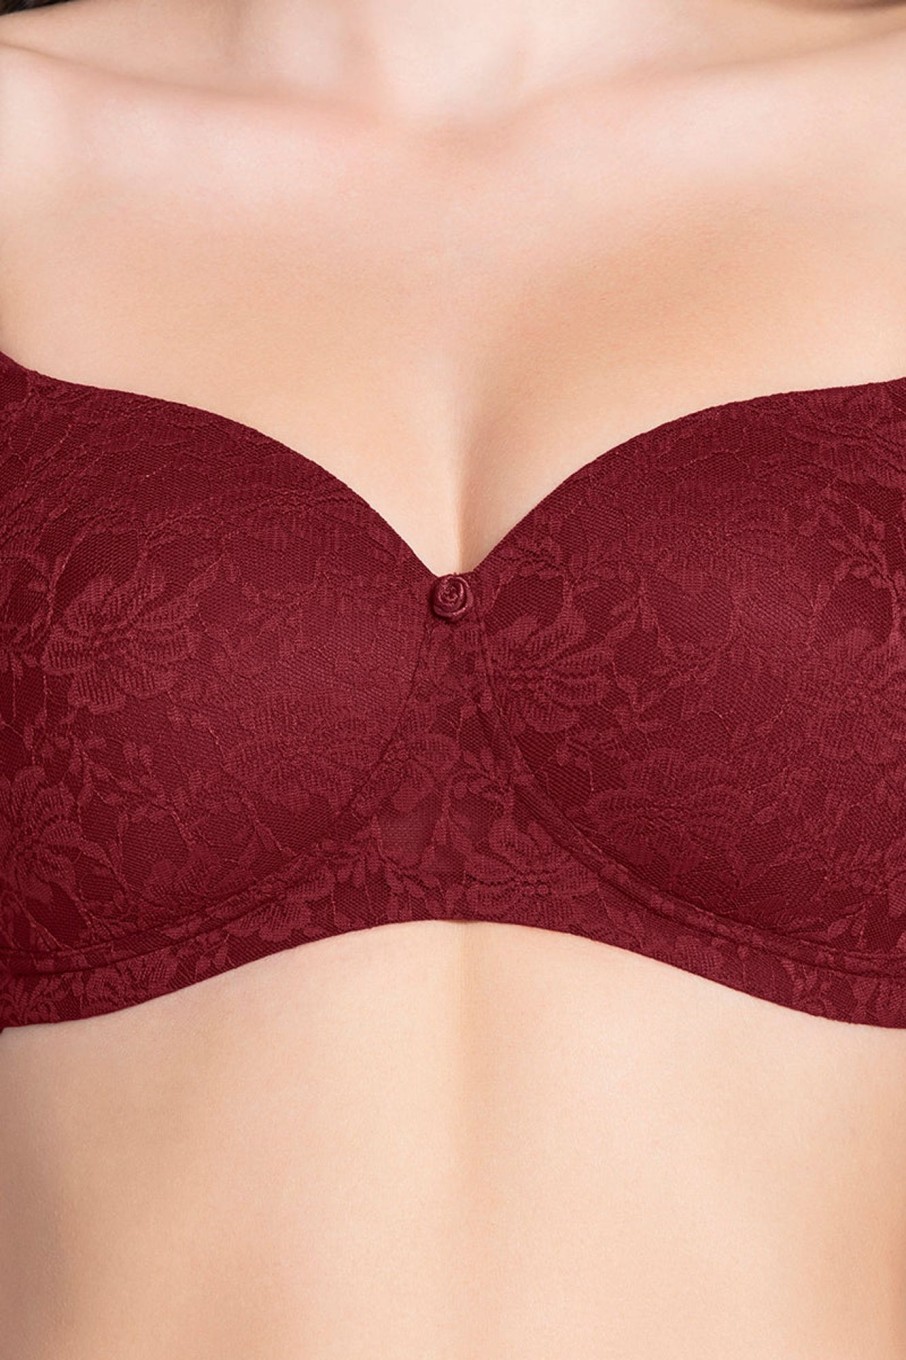 Bras Amante Floral Romance Padded Non-Wired Lace Bra Burgundy Wine